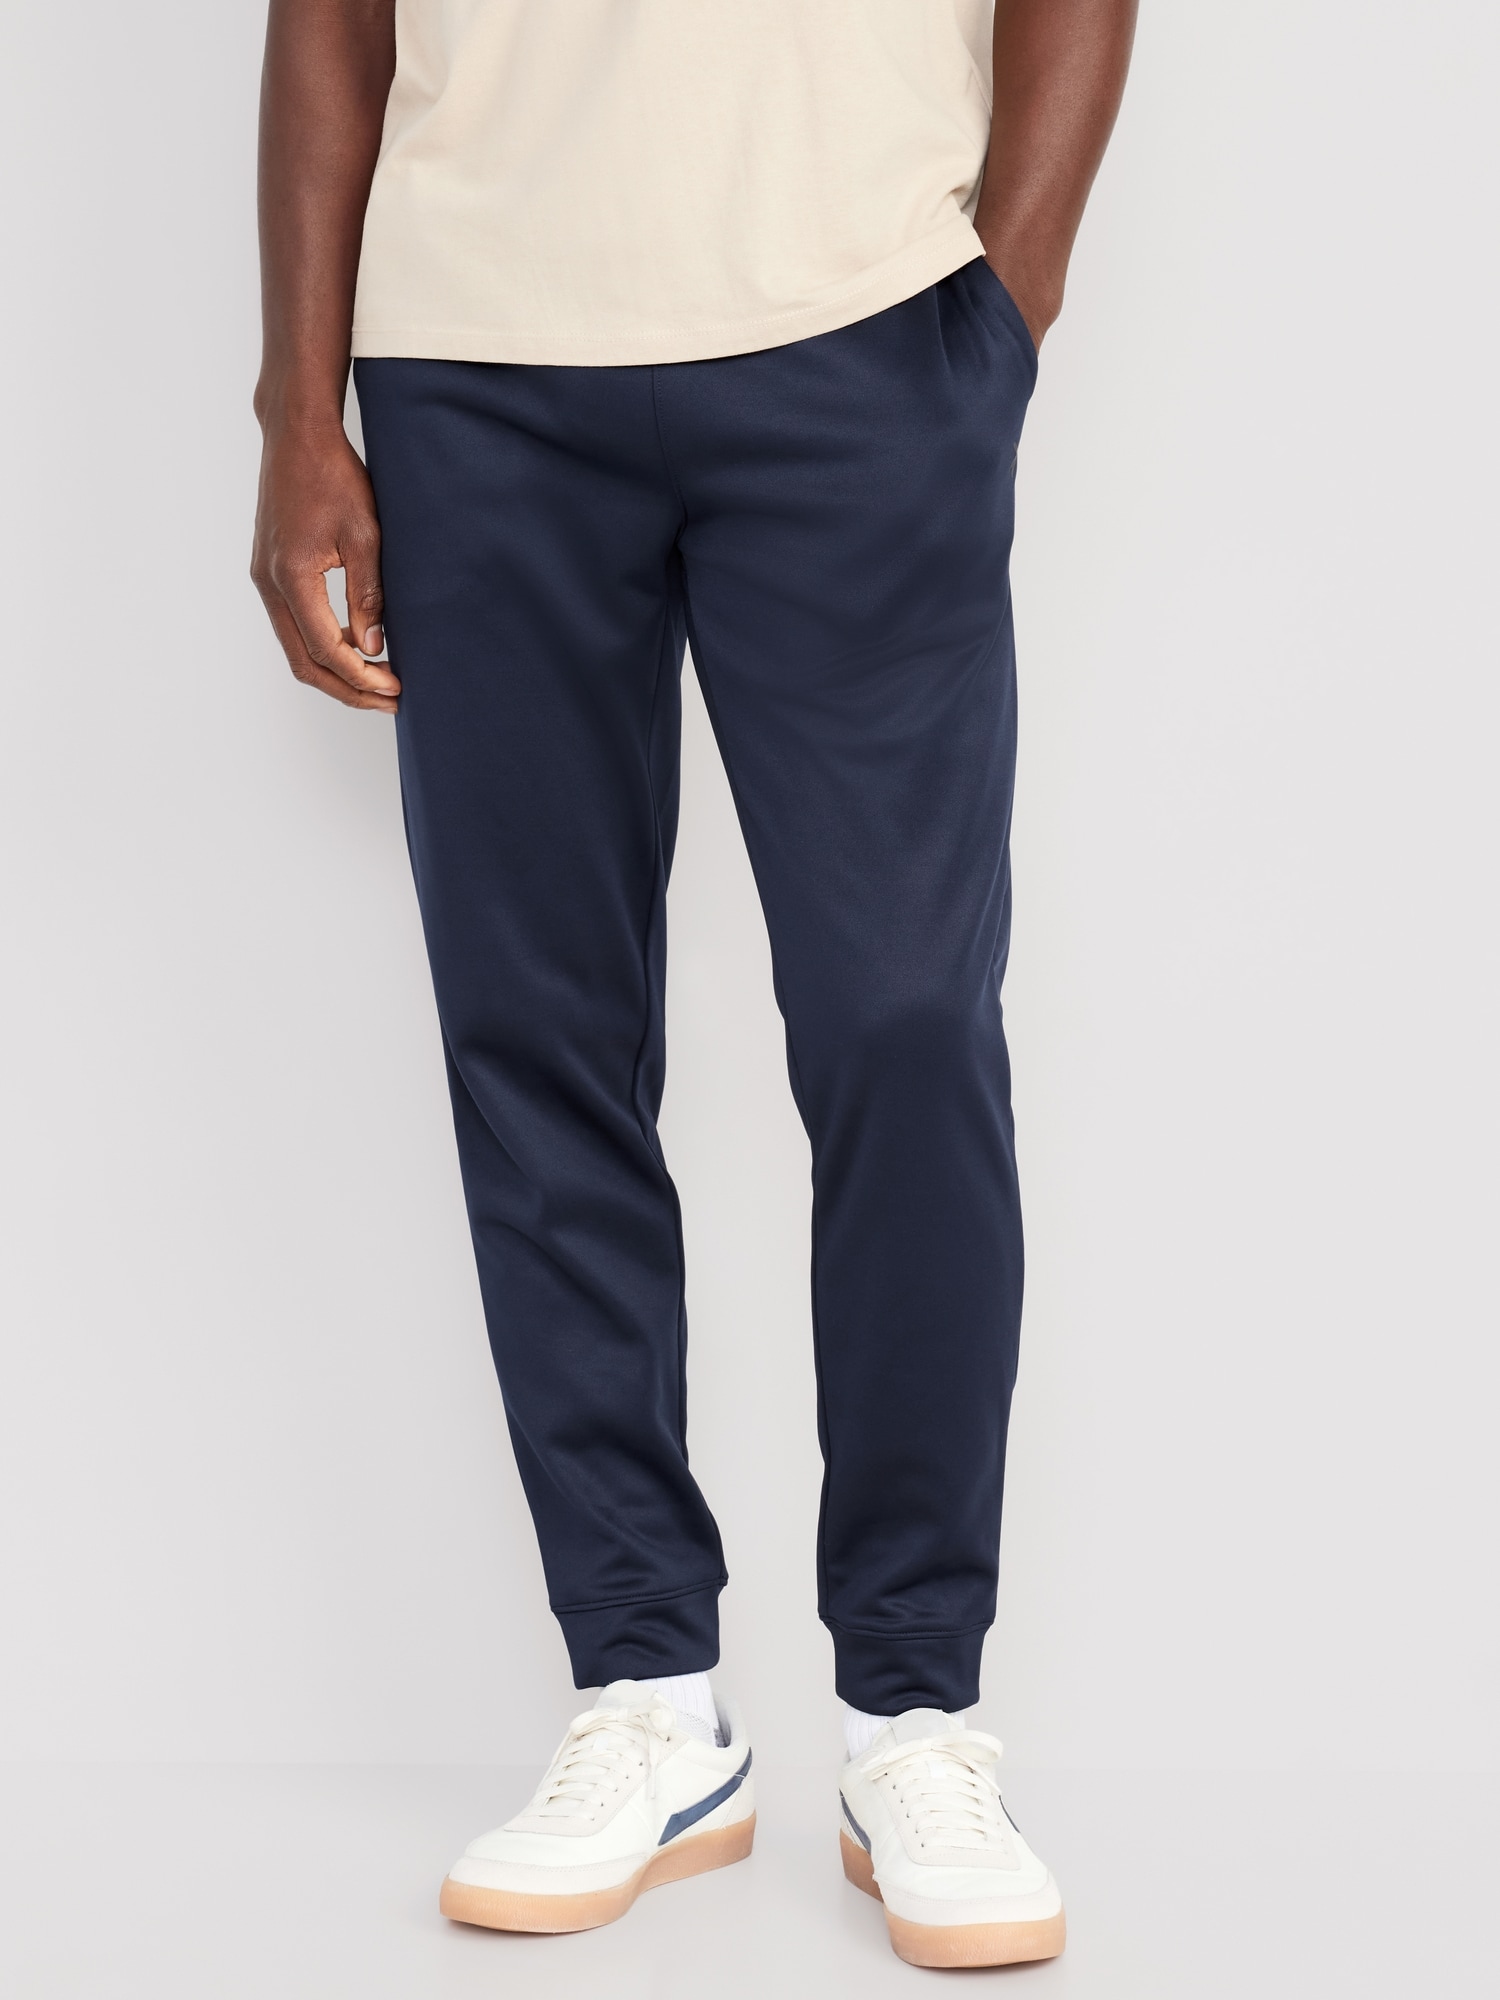 Go-Dry Performance Jogger Sweatpants for Men | Old Navy